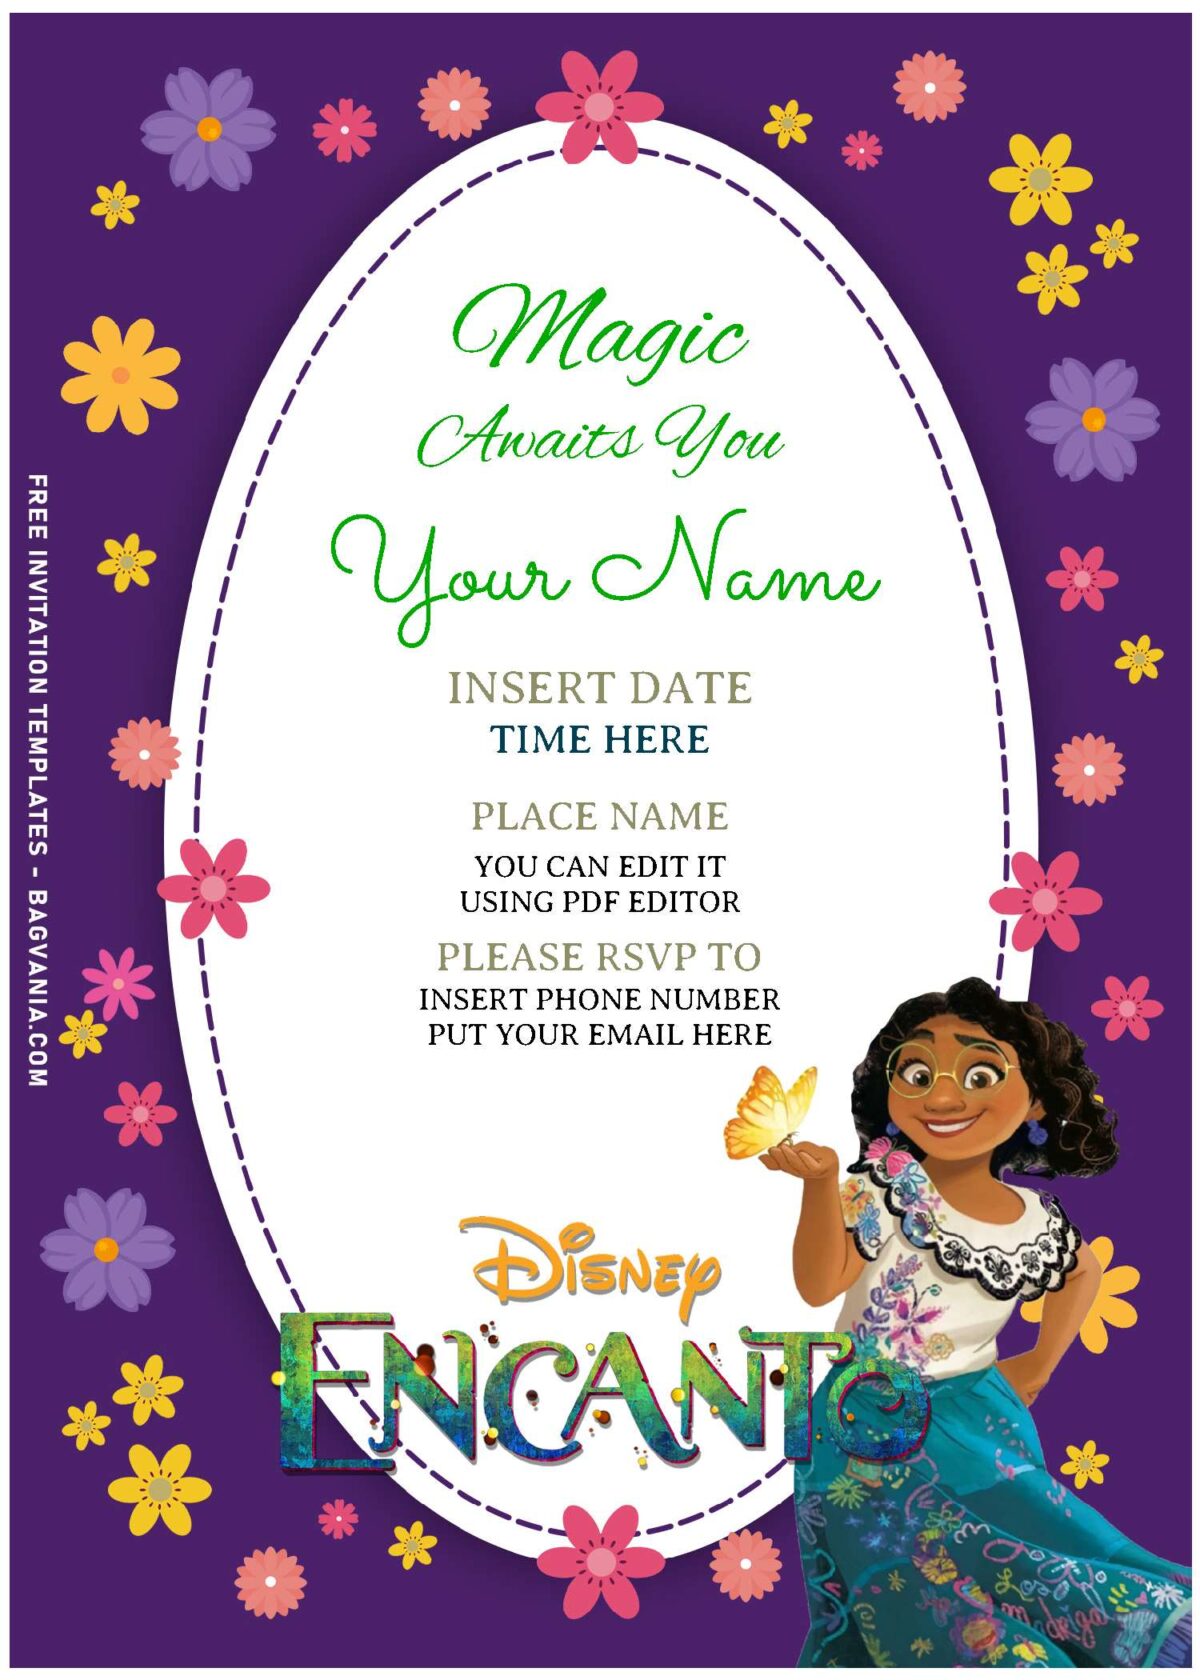 (Free Editable PDF) Mirable & Friends Encanto Birthday Invitation Templates with colorful flowers